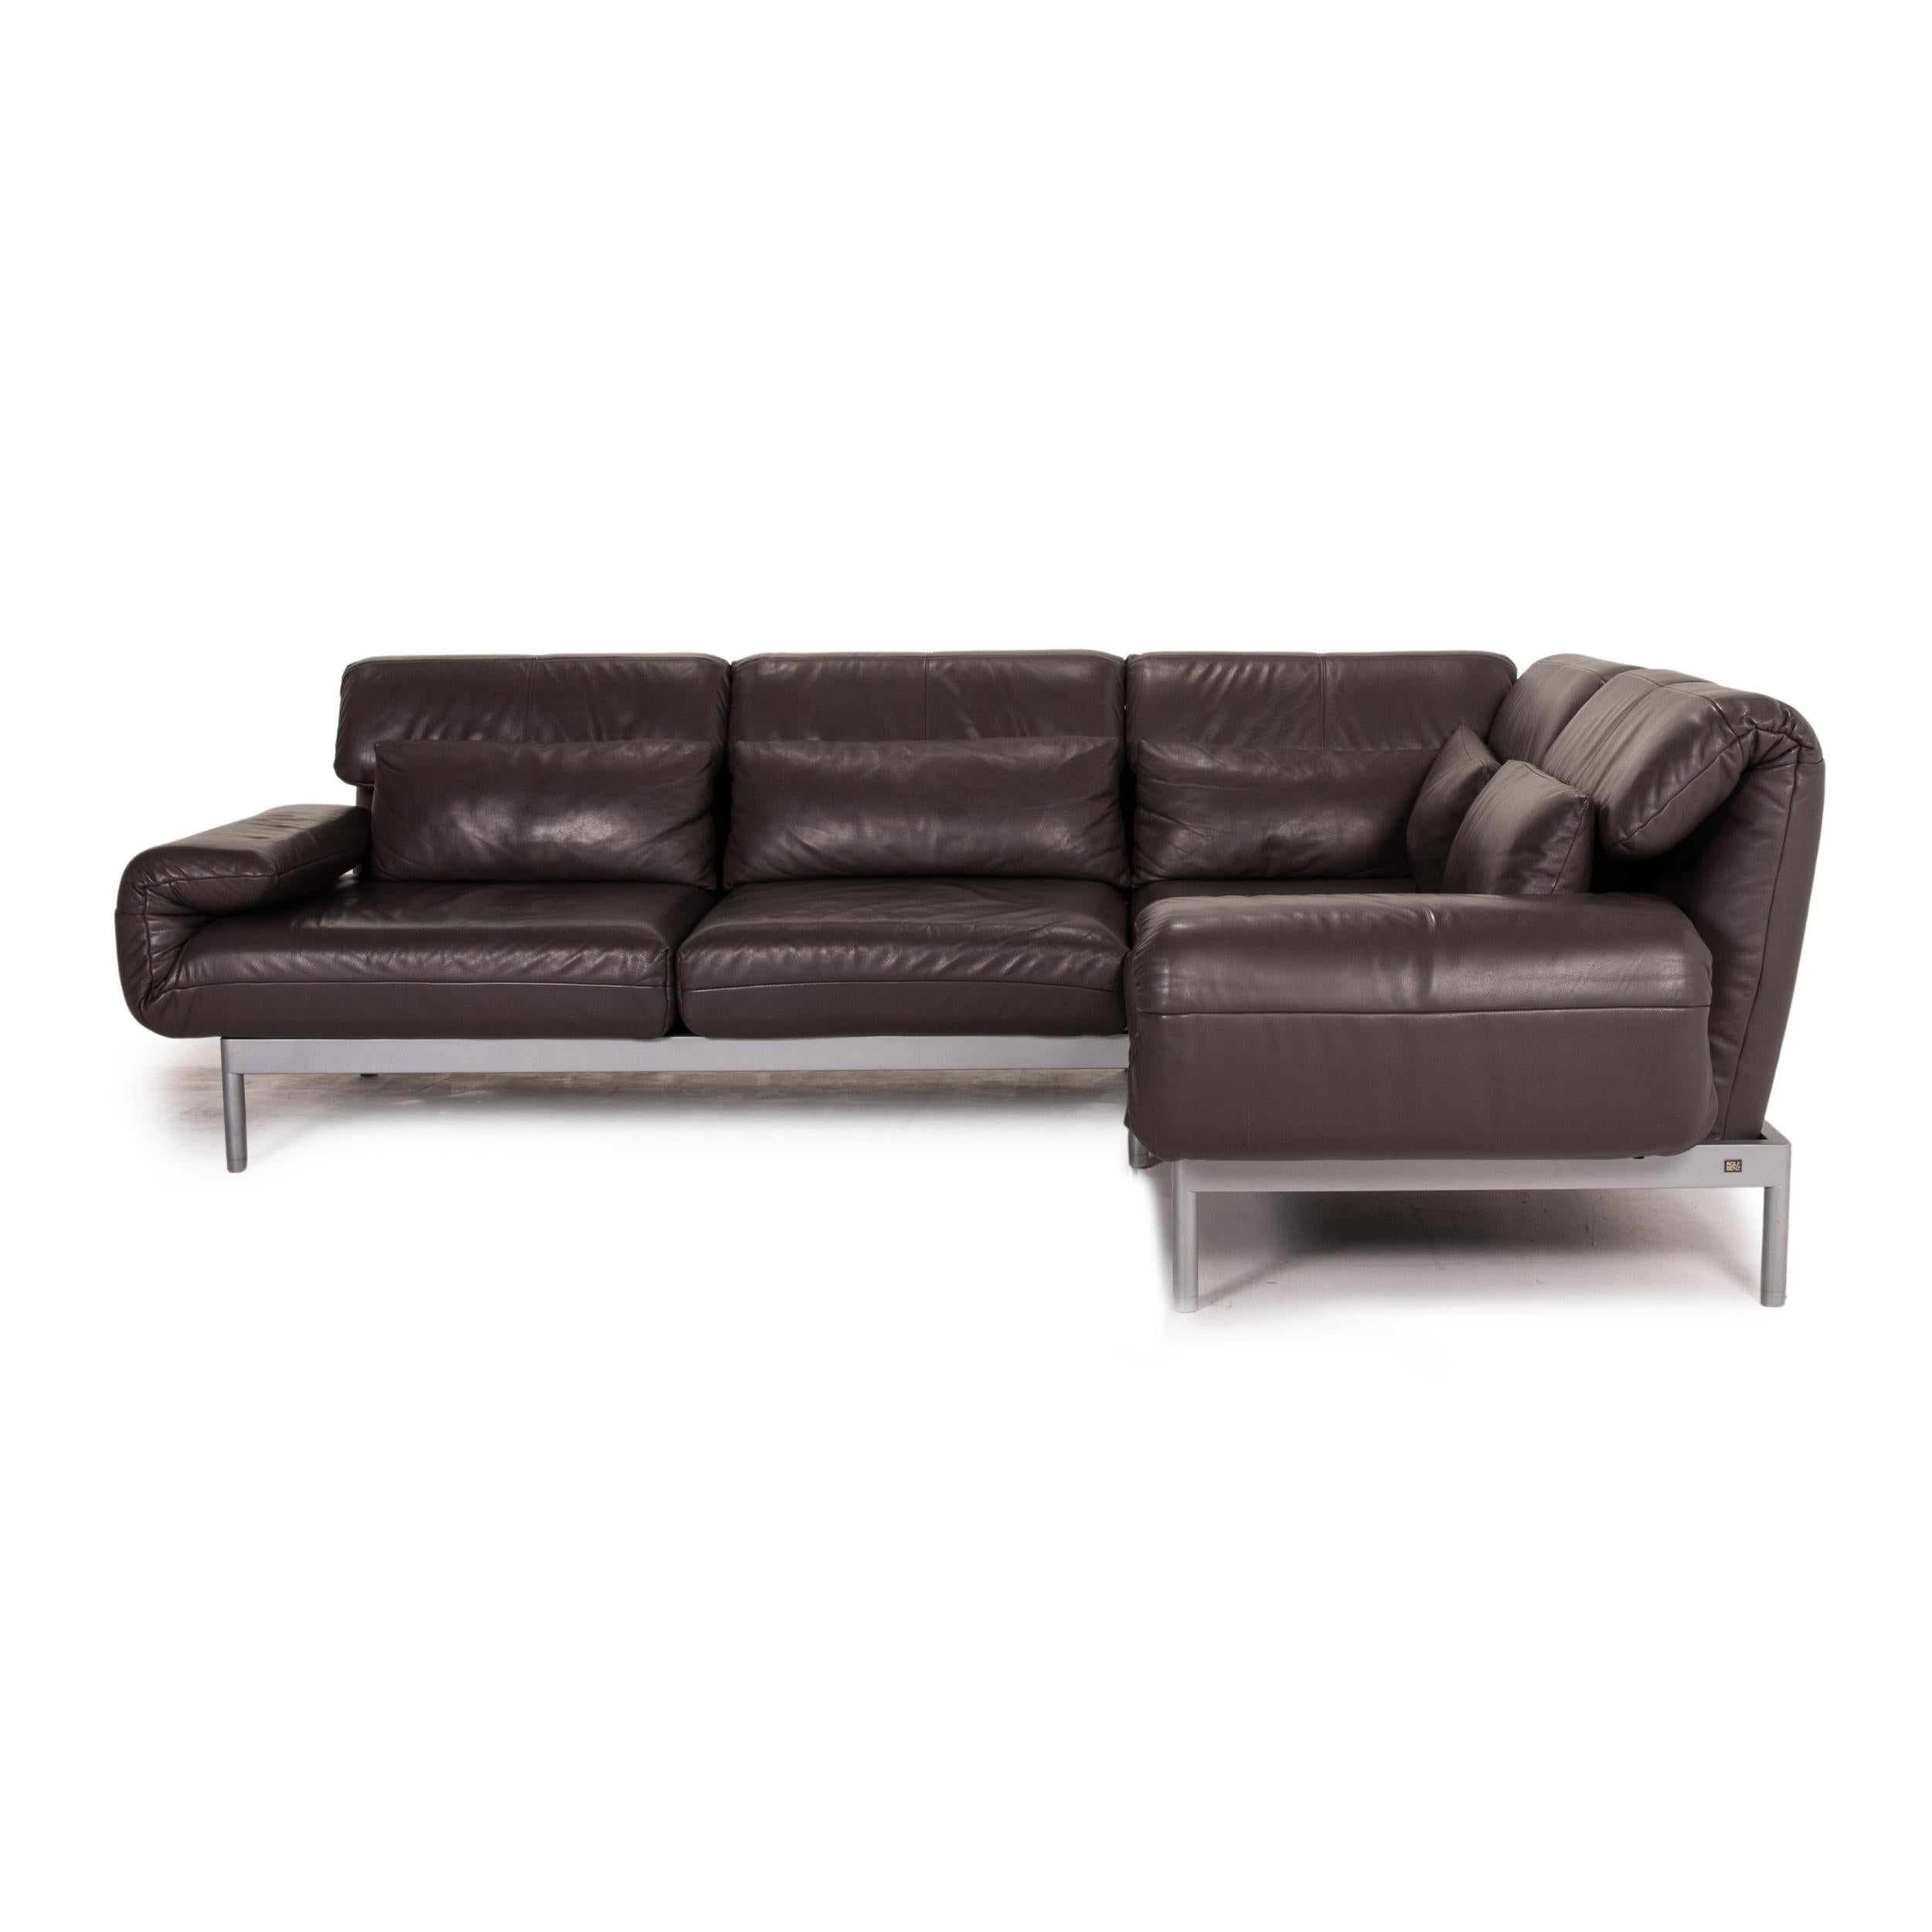 Rolf Benz Plura Leather Corner Sofa Brown Dark Brown Function Relax Function For Sale 9